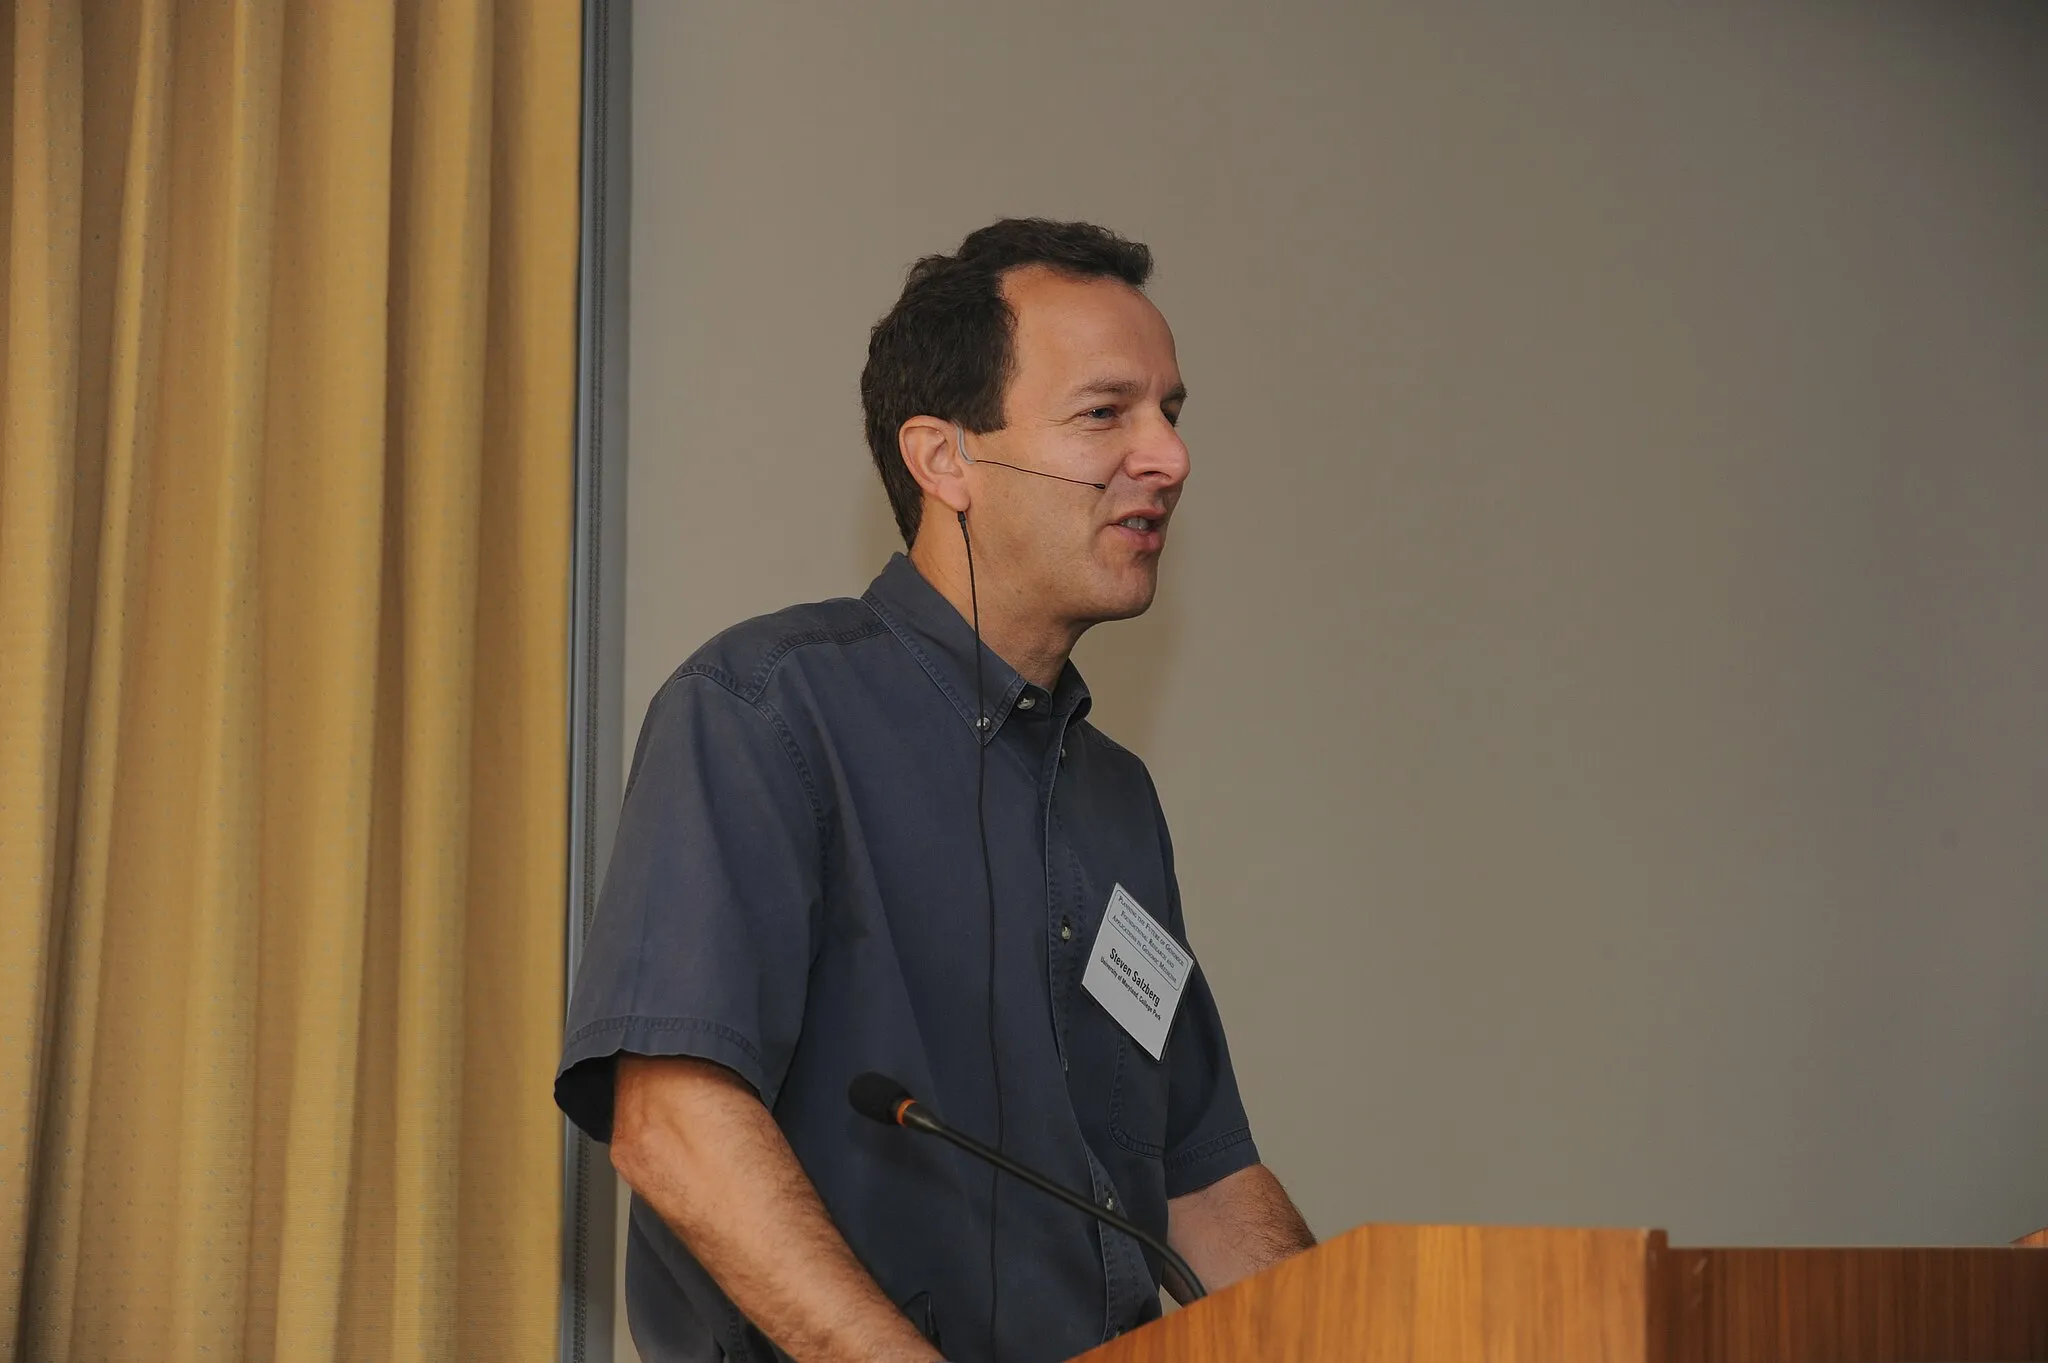 Photo showing: American biologist and computer scientist Steven Salzberg at an event on "Planning the Future of Genomics" in the Airlie Conference Center of Warrenton, VA.